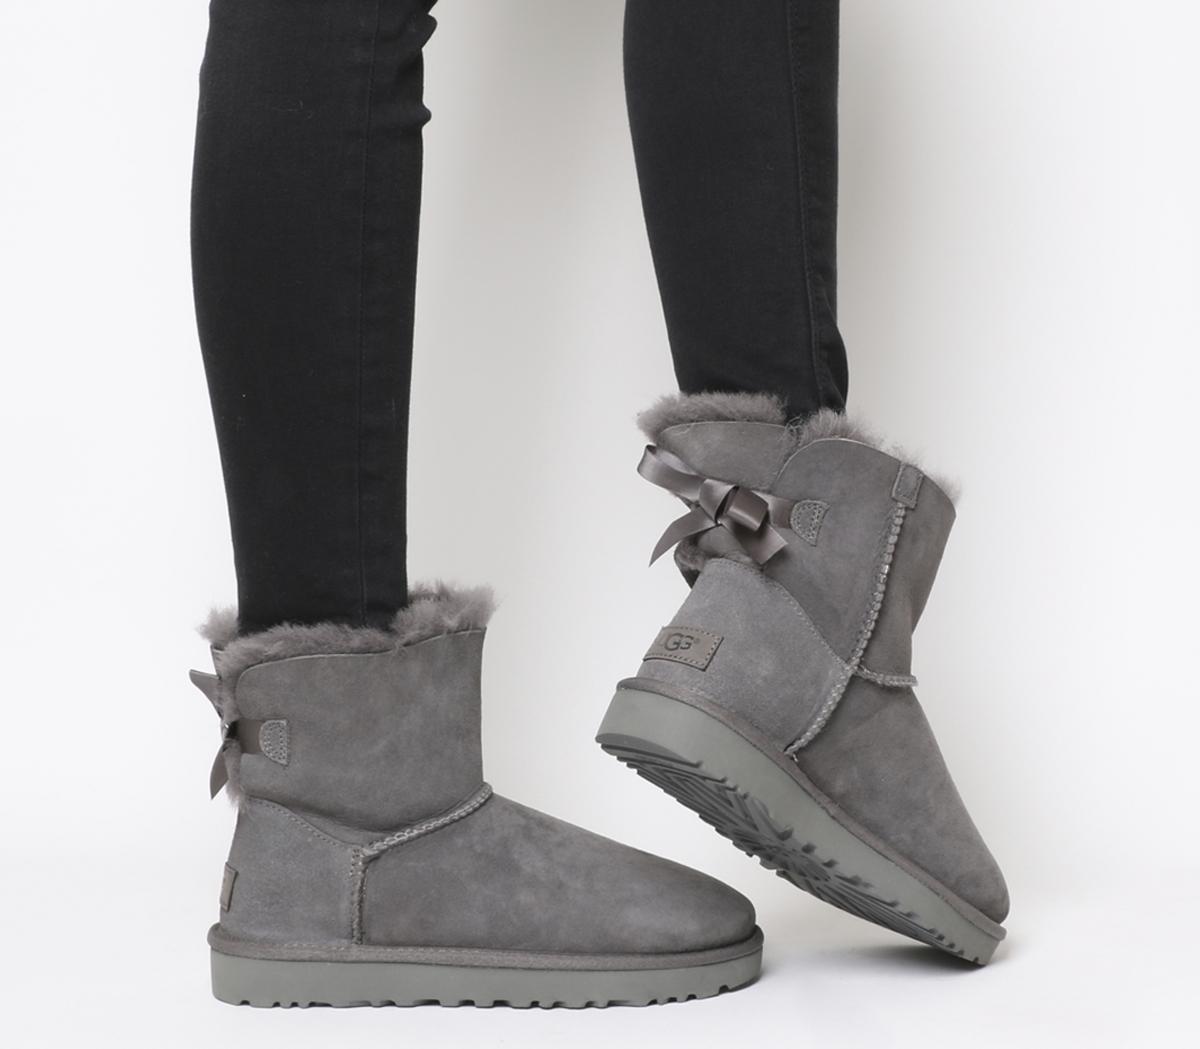 black ugg boots with bows